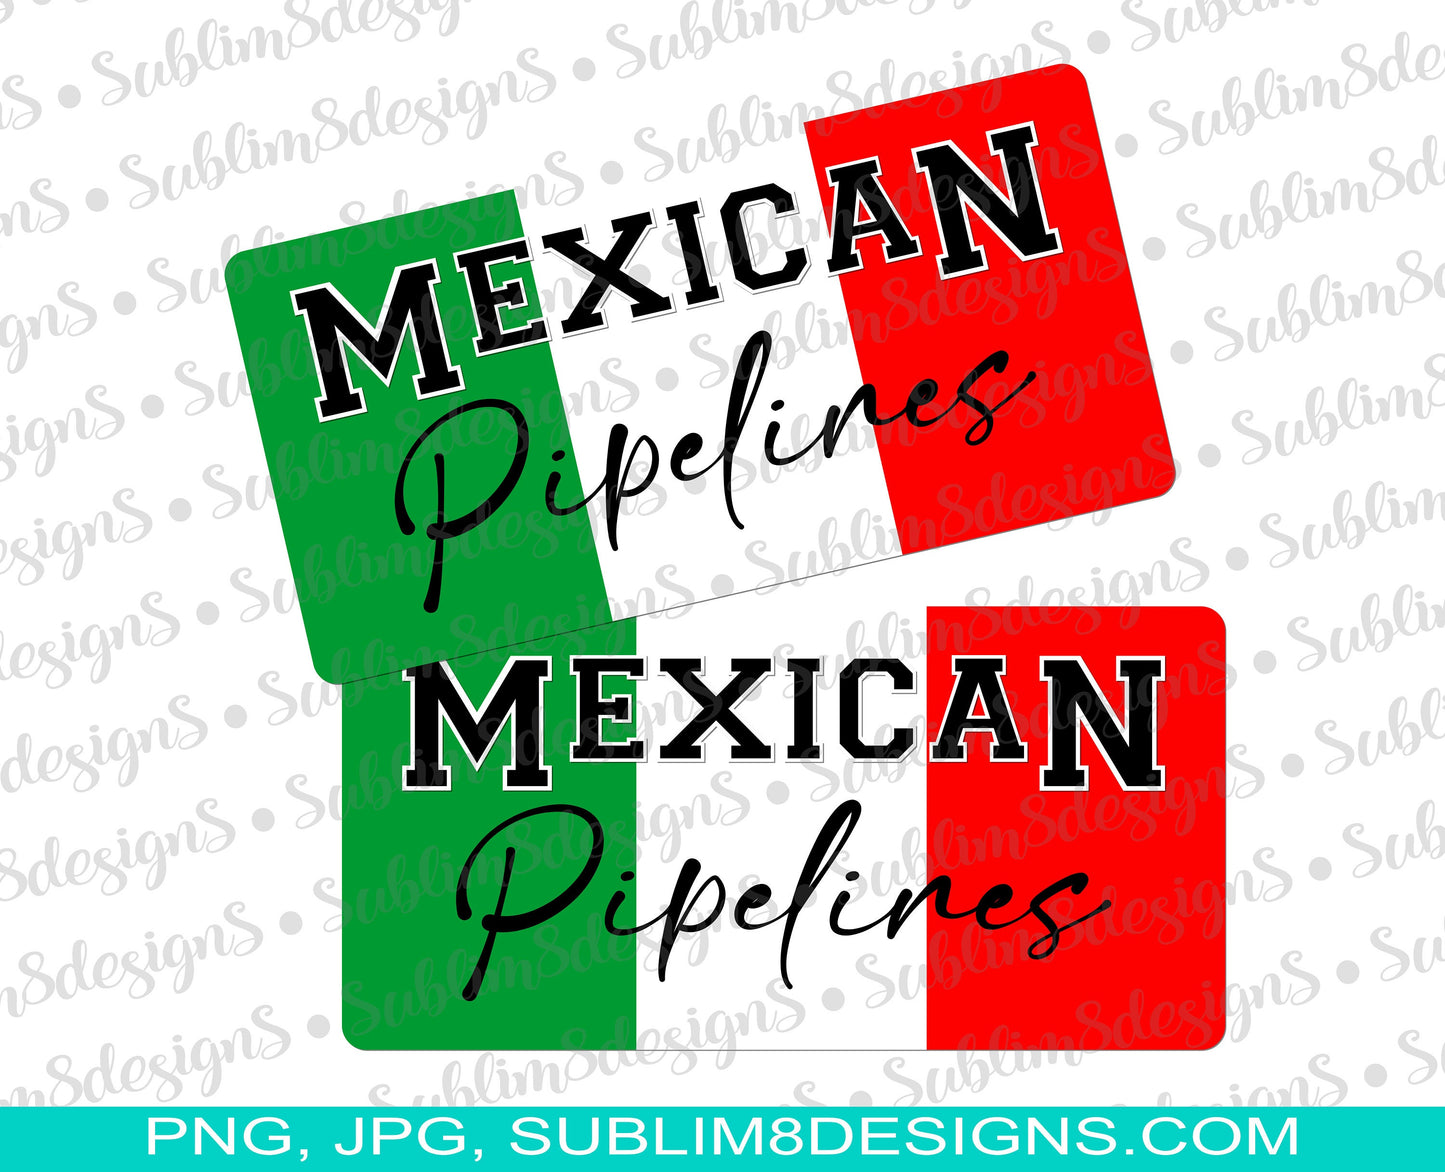 Mexican Pipelines PNG and JPG ONLY